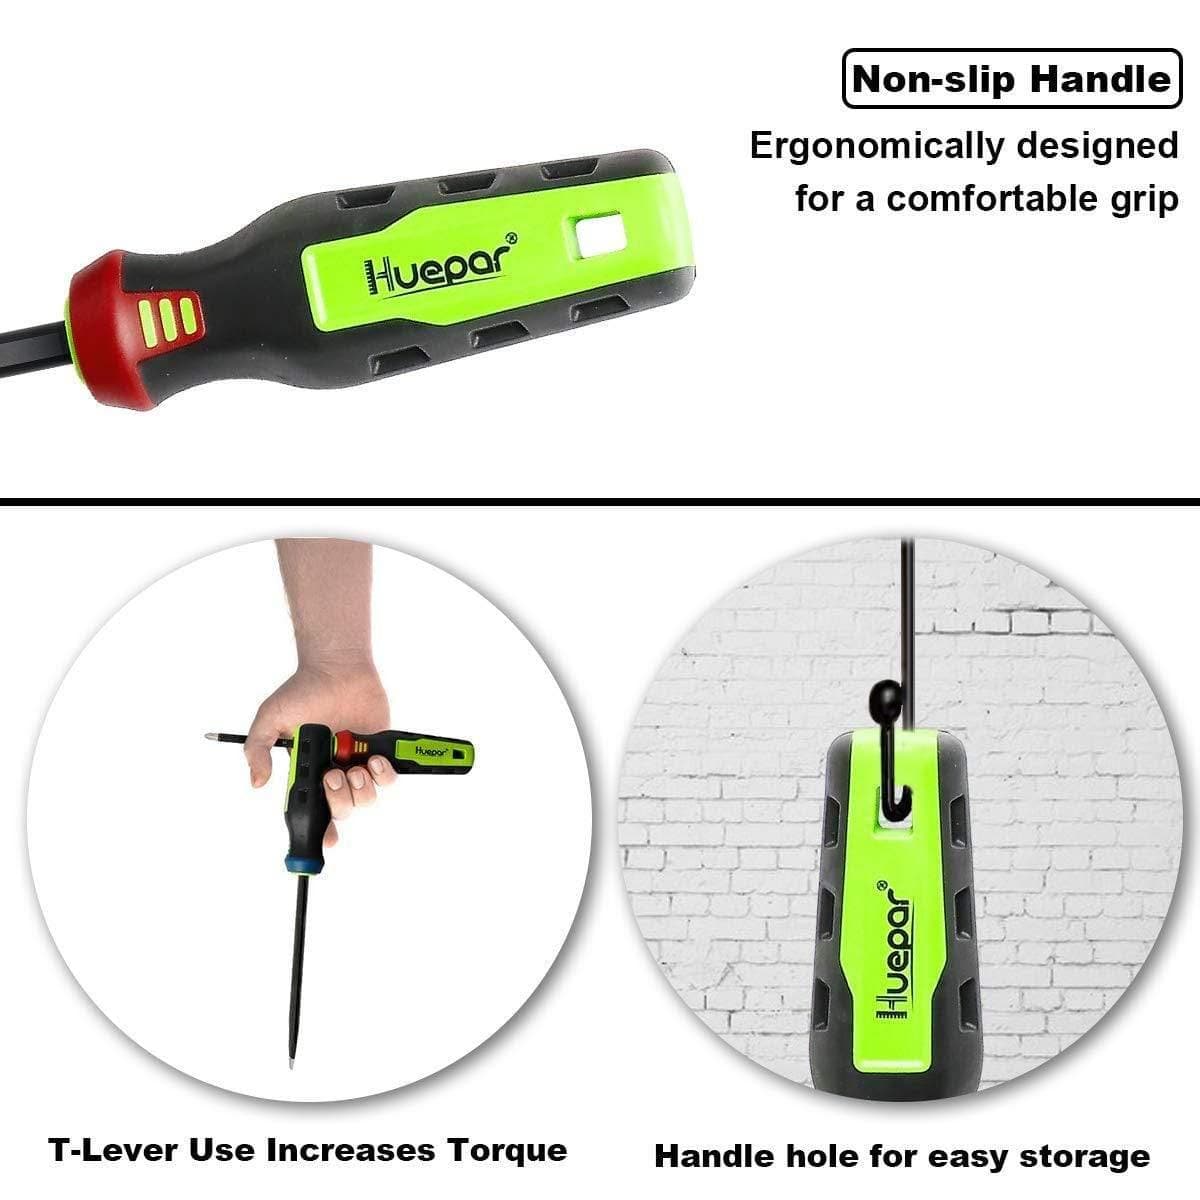 Huepar Magnetic Screwdriver Set with 3 Slotted and 3 Phillips Heads, Diamond Tip, Rust Resistant Shaft, Professional 6PCS Kit, Advanced Technology, Best Laser Level, Free Shipping0